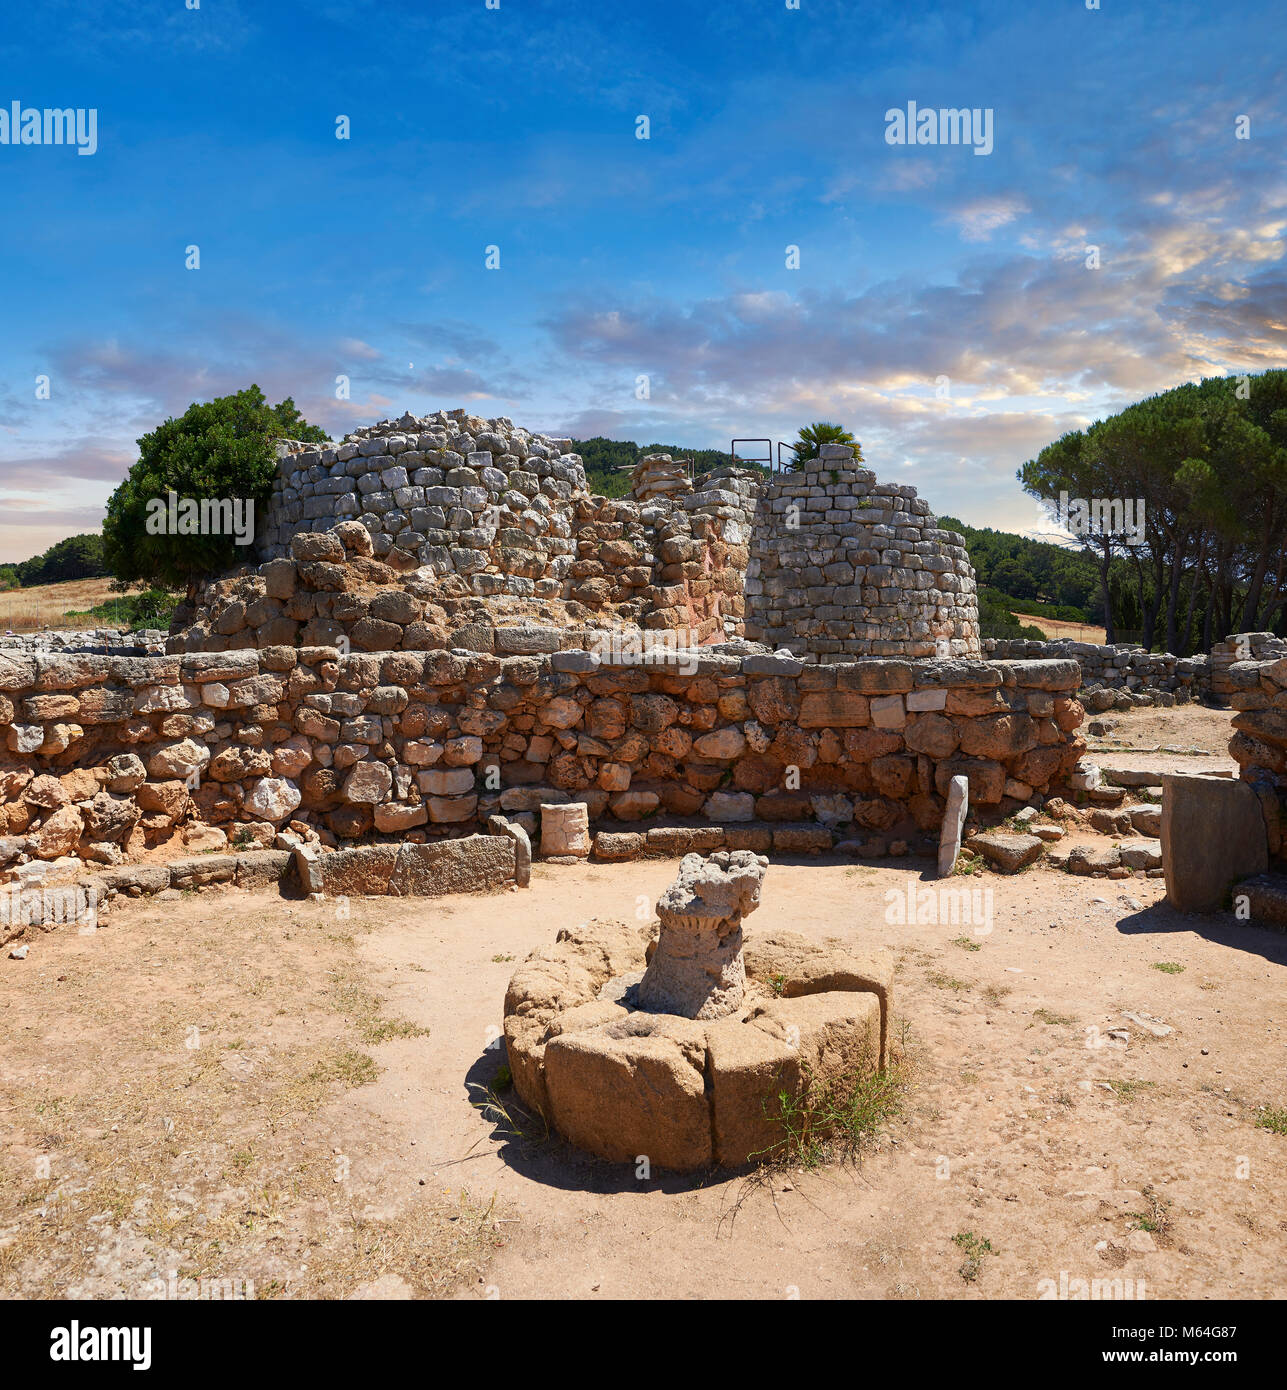 Pictures and image of the exterior ruins of Palmavera prehistoric Nuragic village meeting hall with Nuraghe tower behind,  archaeological site, middle Stock Photo